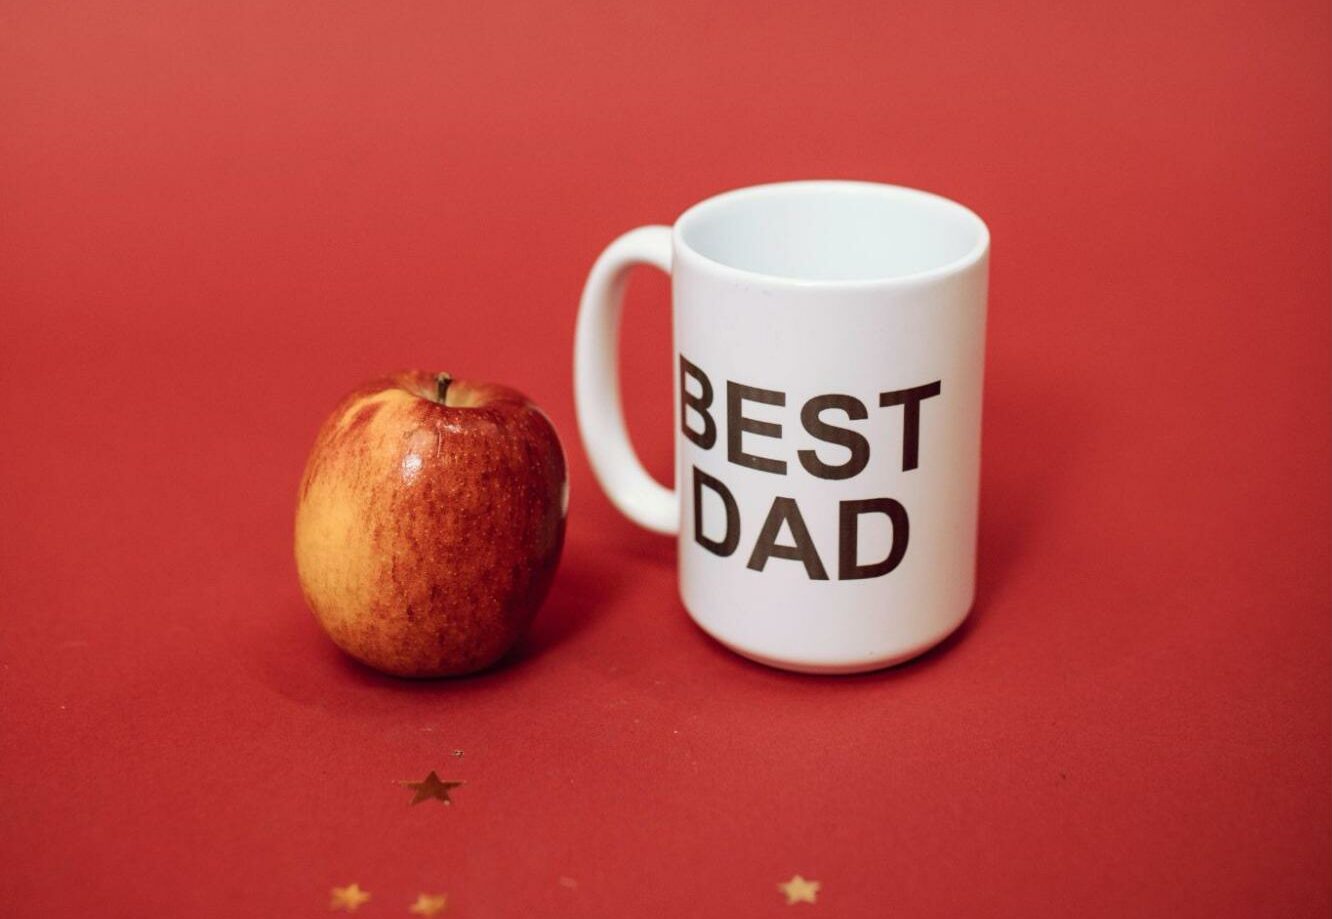 worst father's day gift ideas - best dad mug